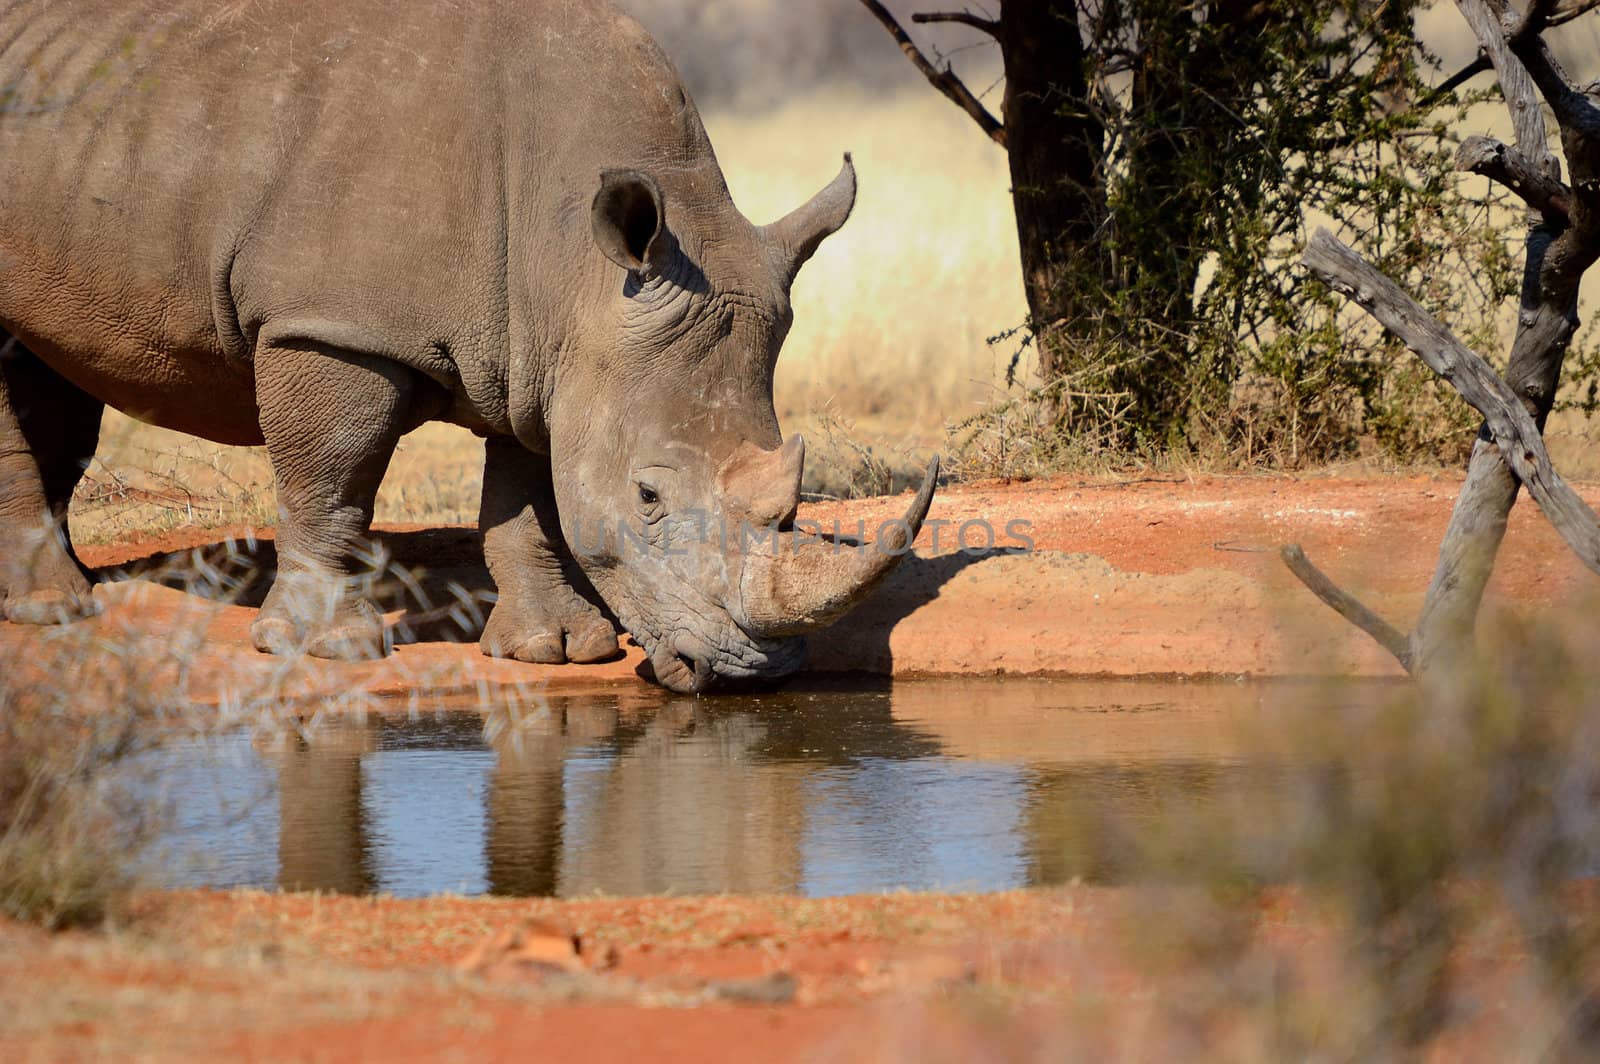 White rhino with big horn drinking water